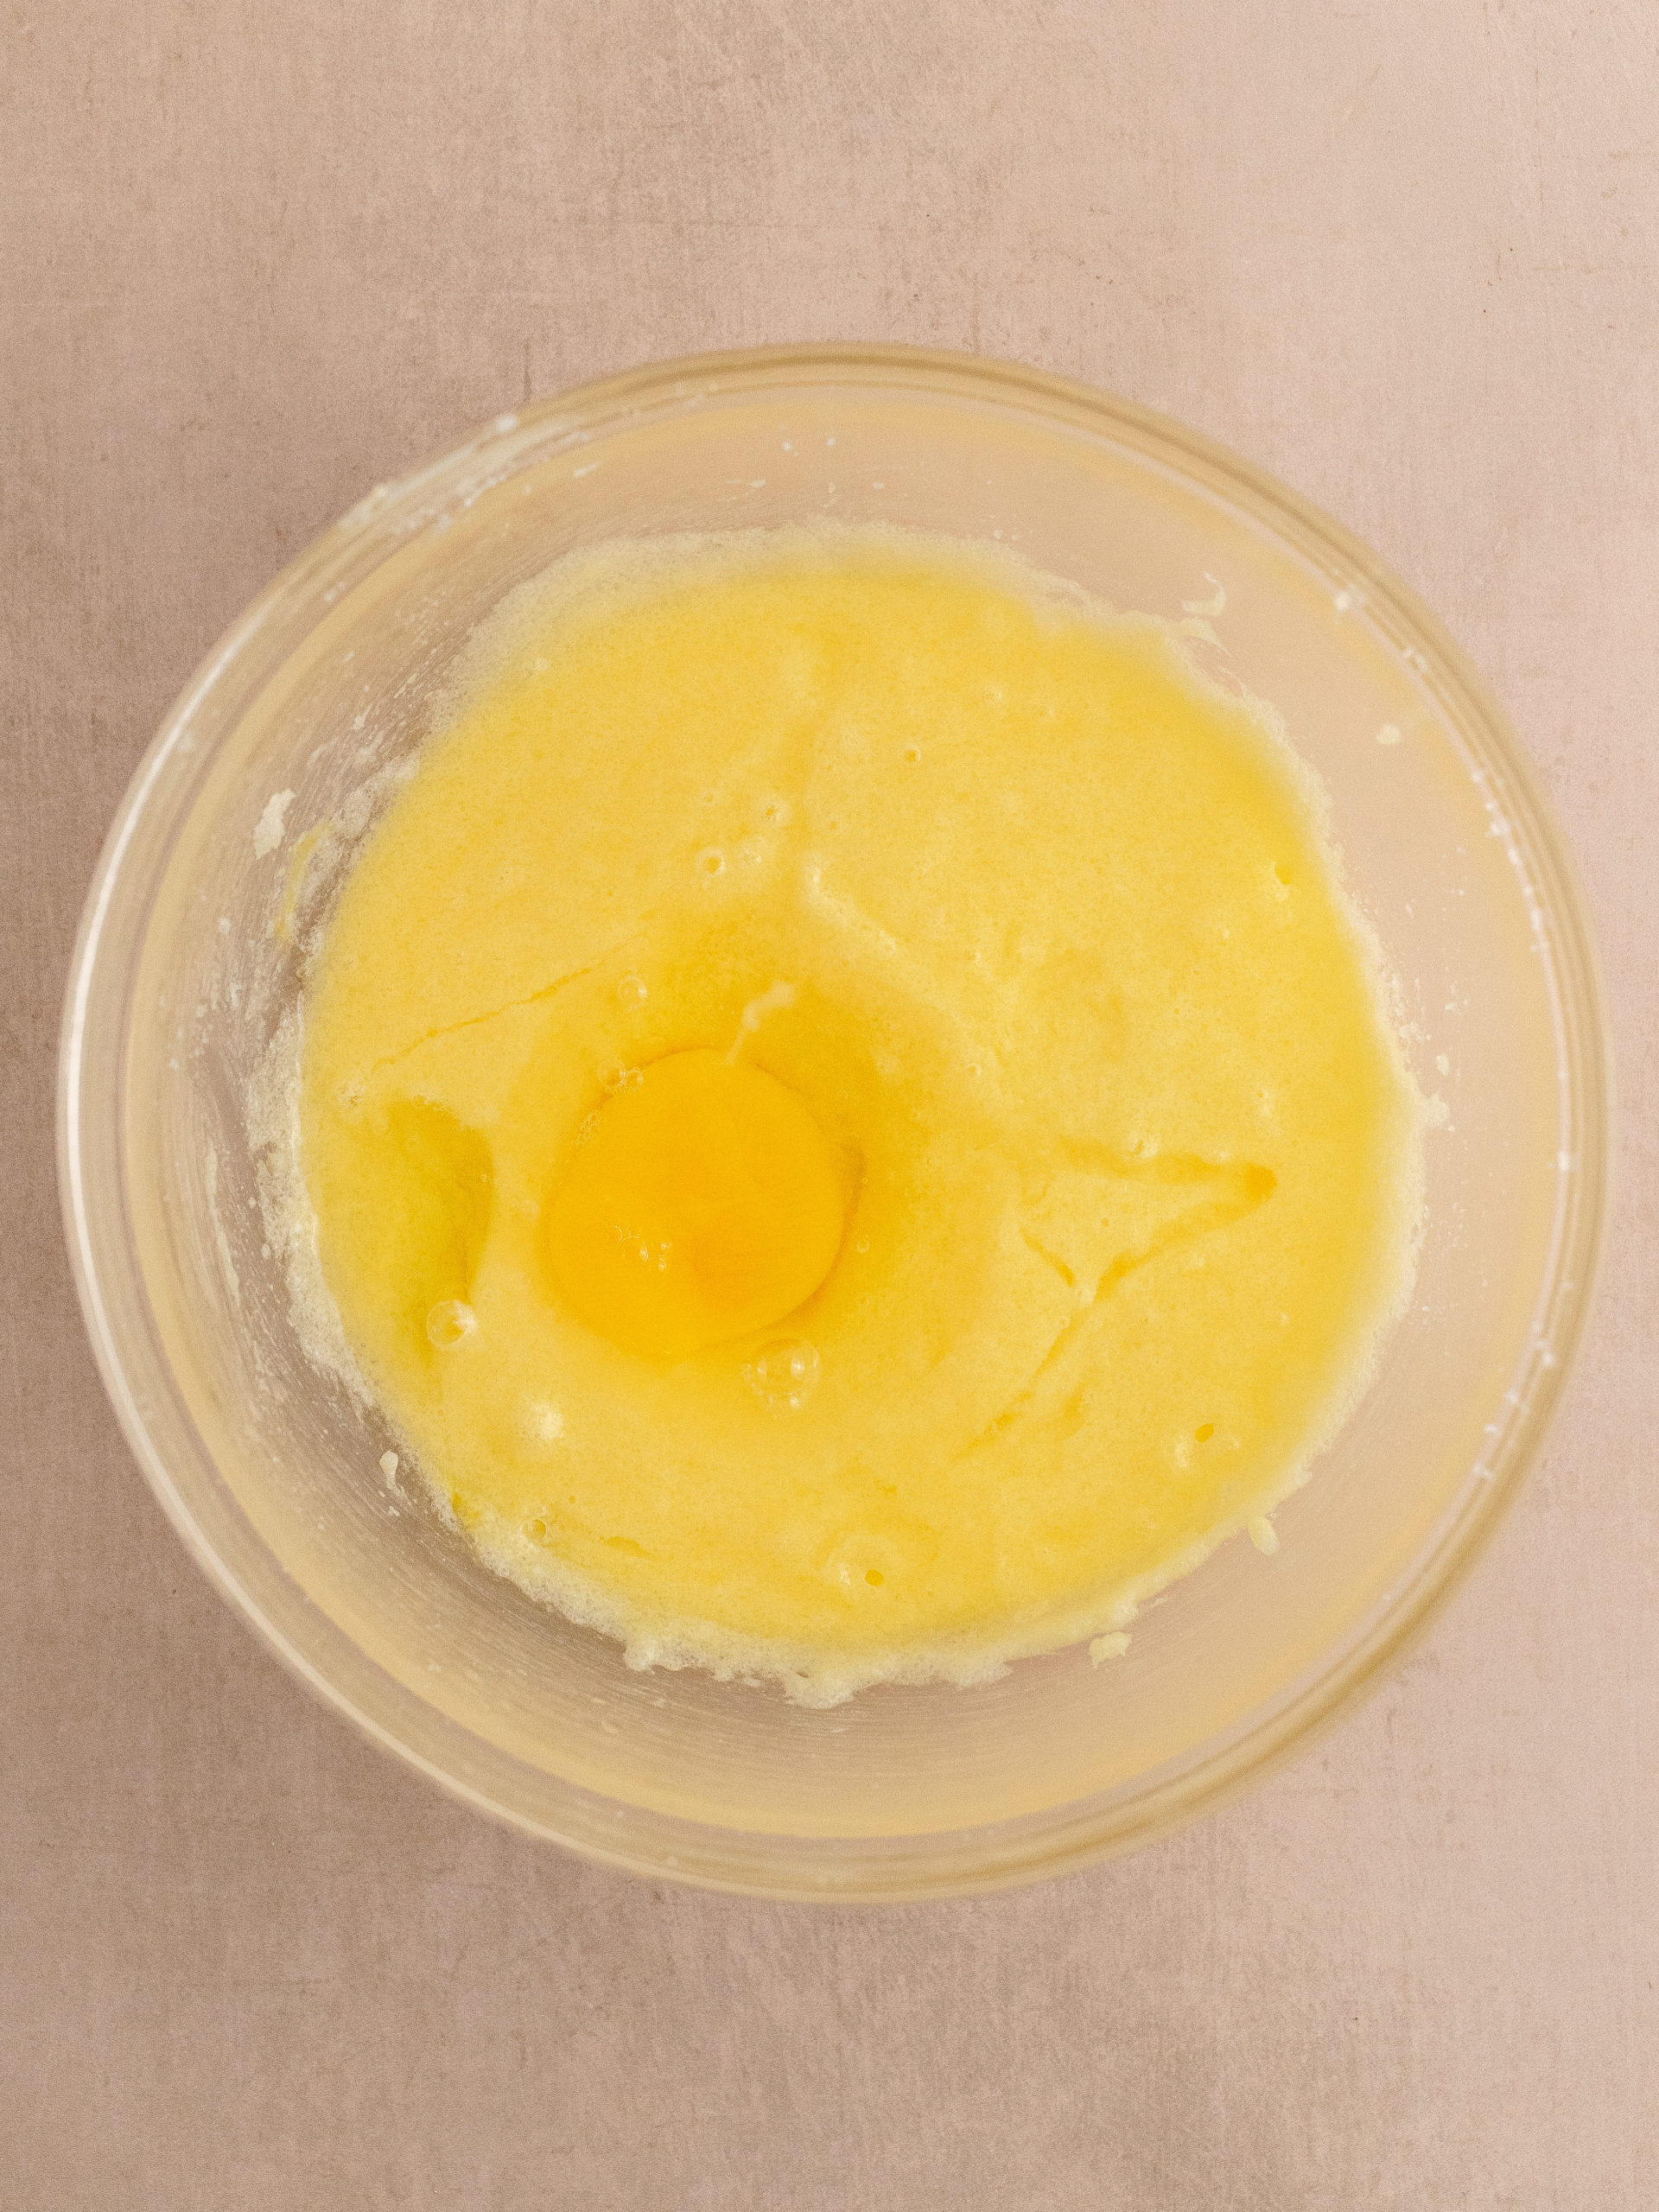 eggs are added to the sugar and butter.